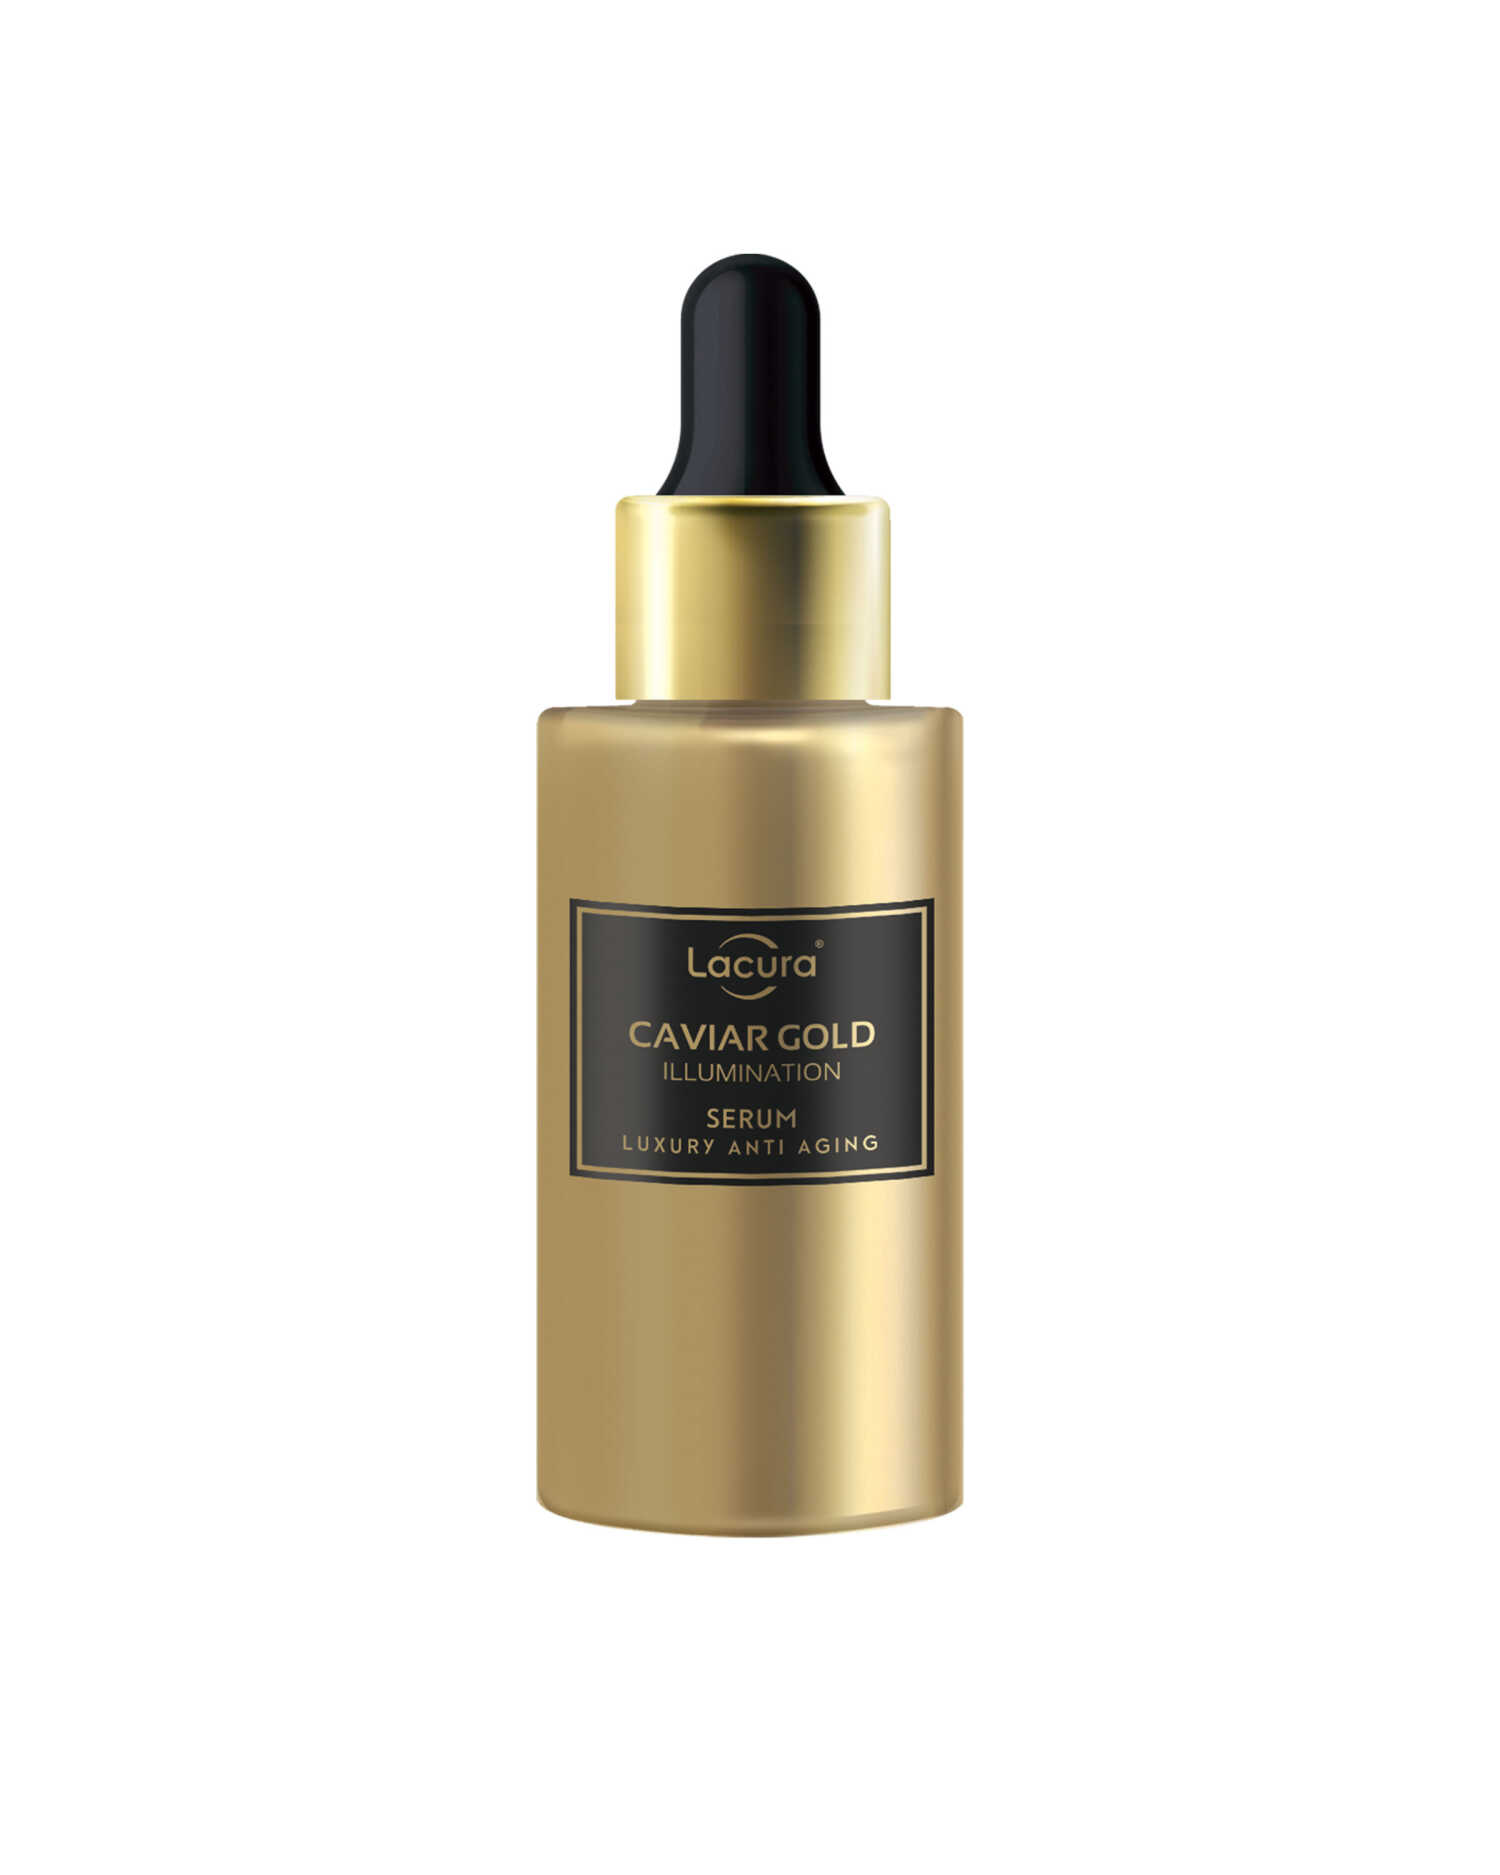 Or save hundreds by swapping to Aldi’s Lacura gold serum dupe